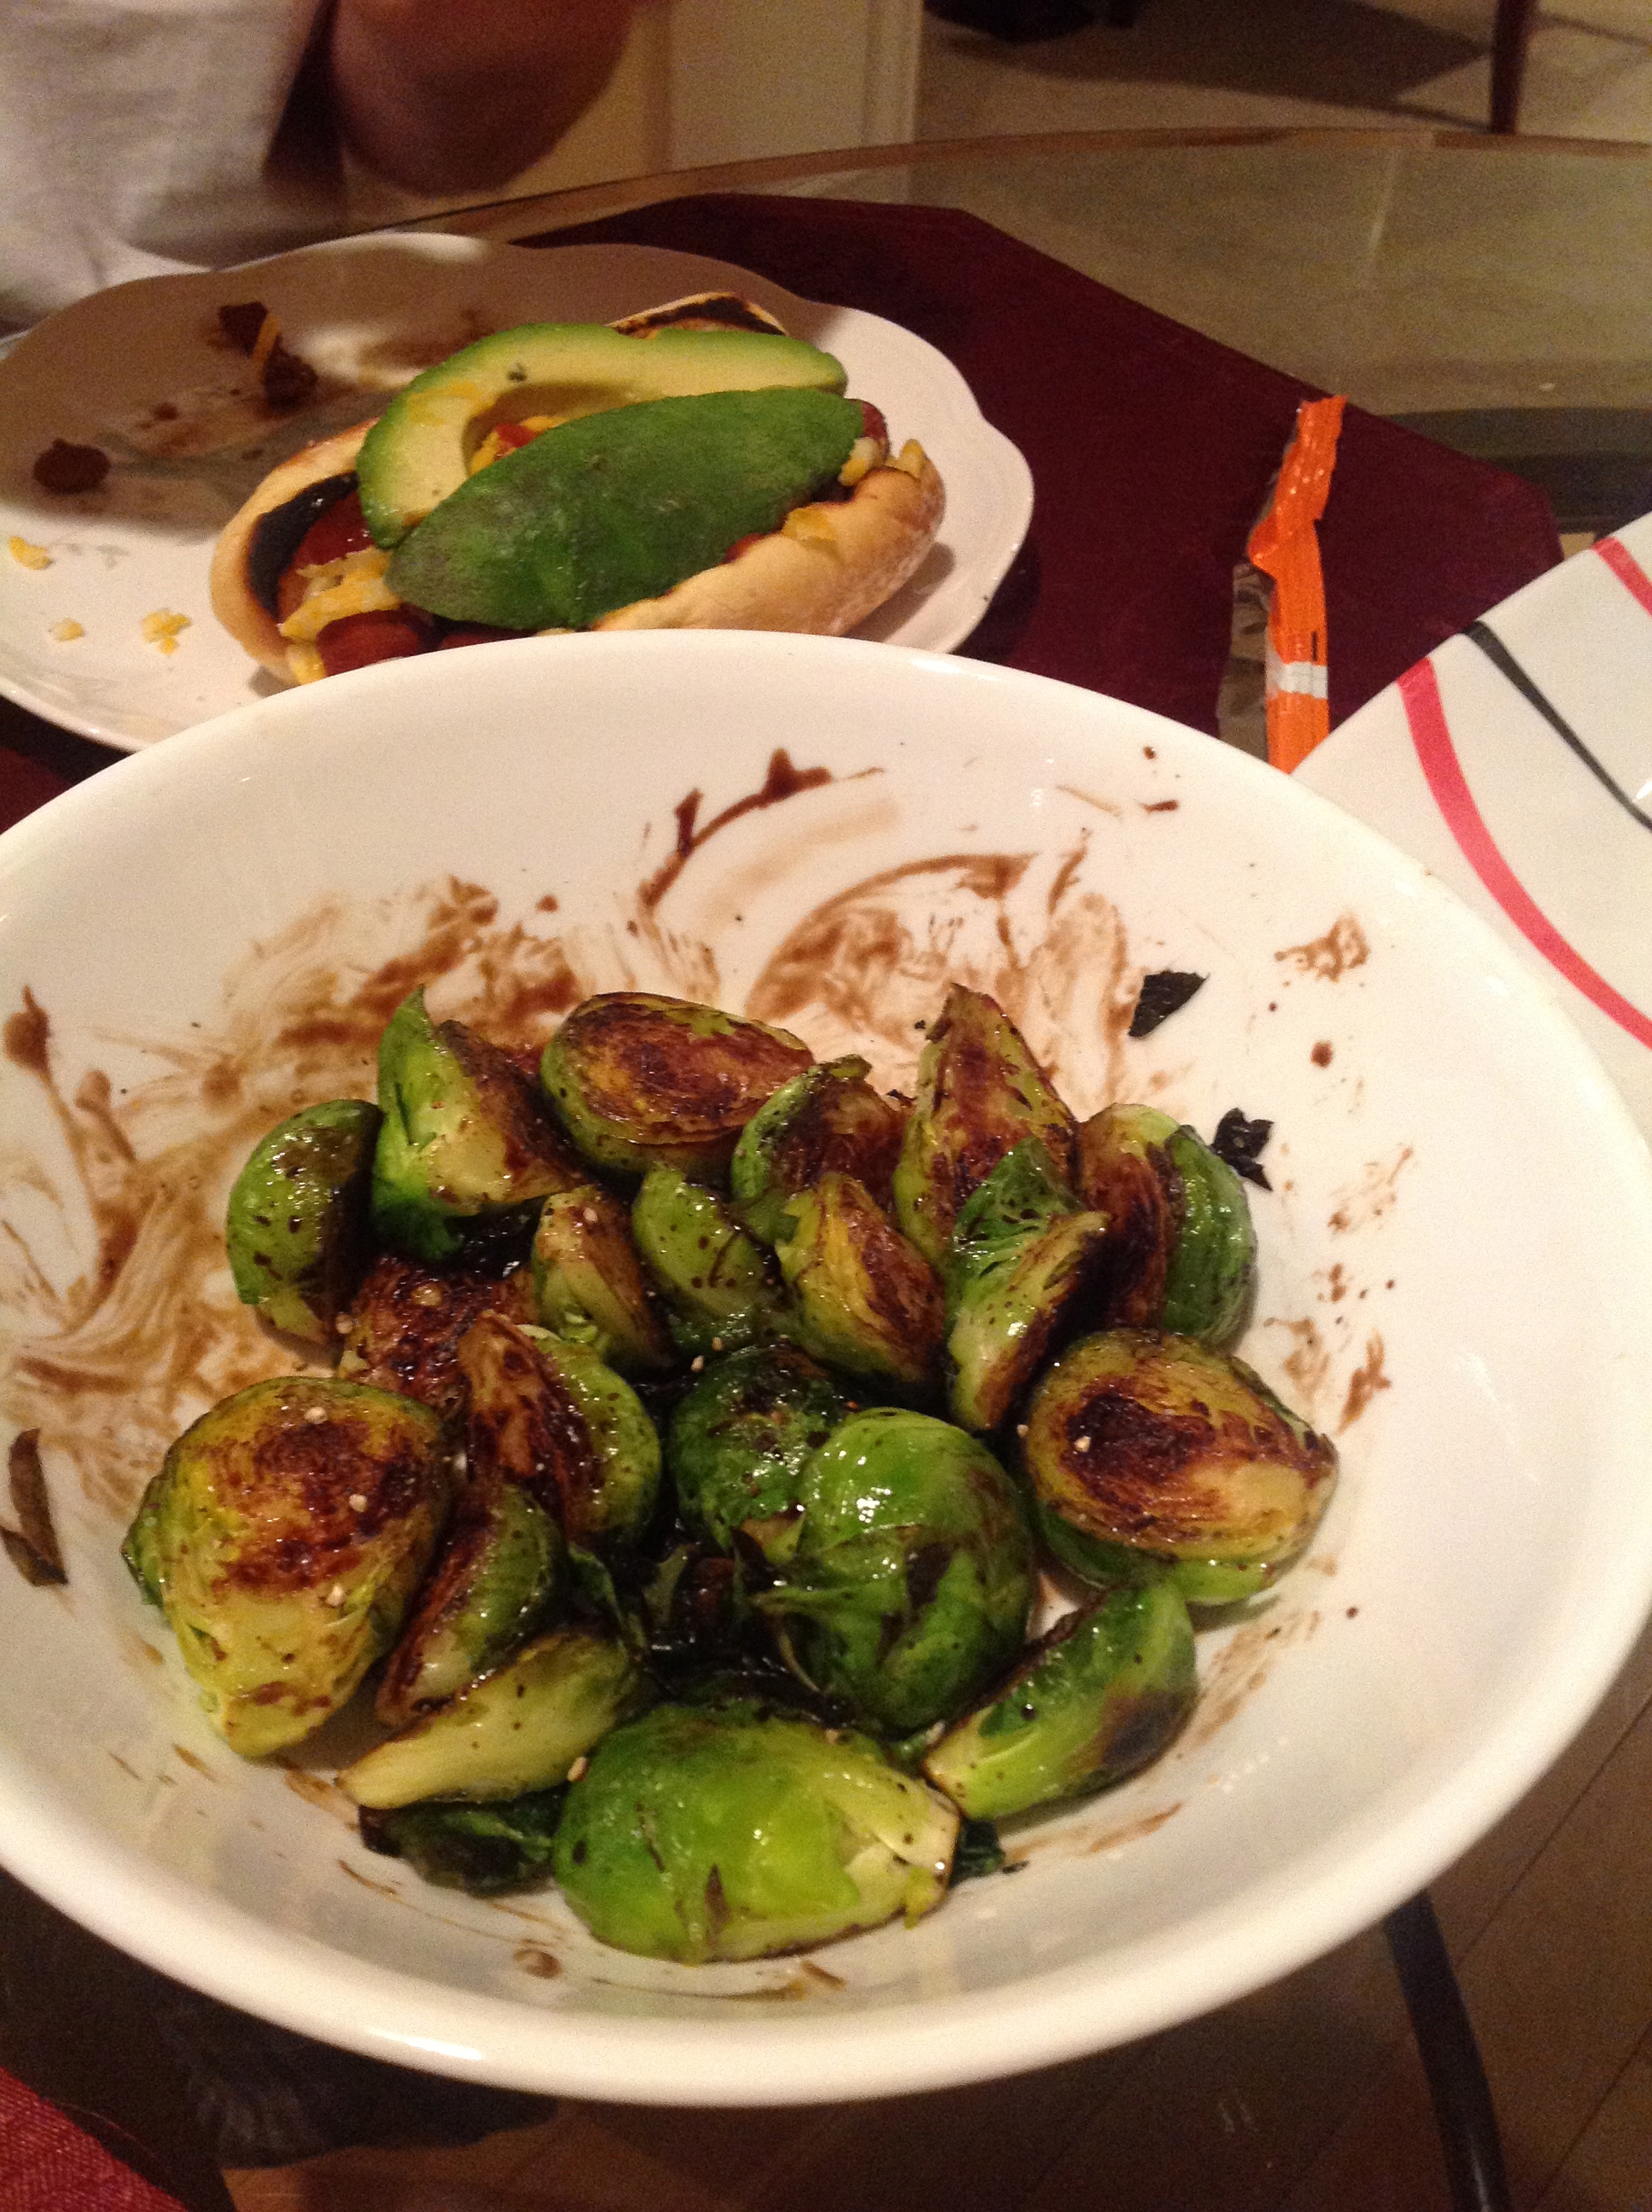 brussels sprouts to go with our hotdogs